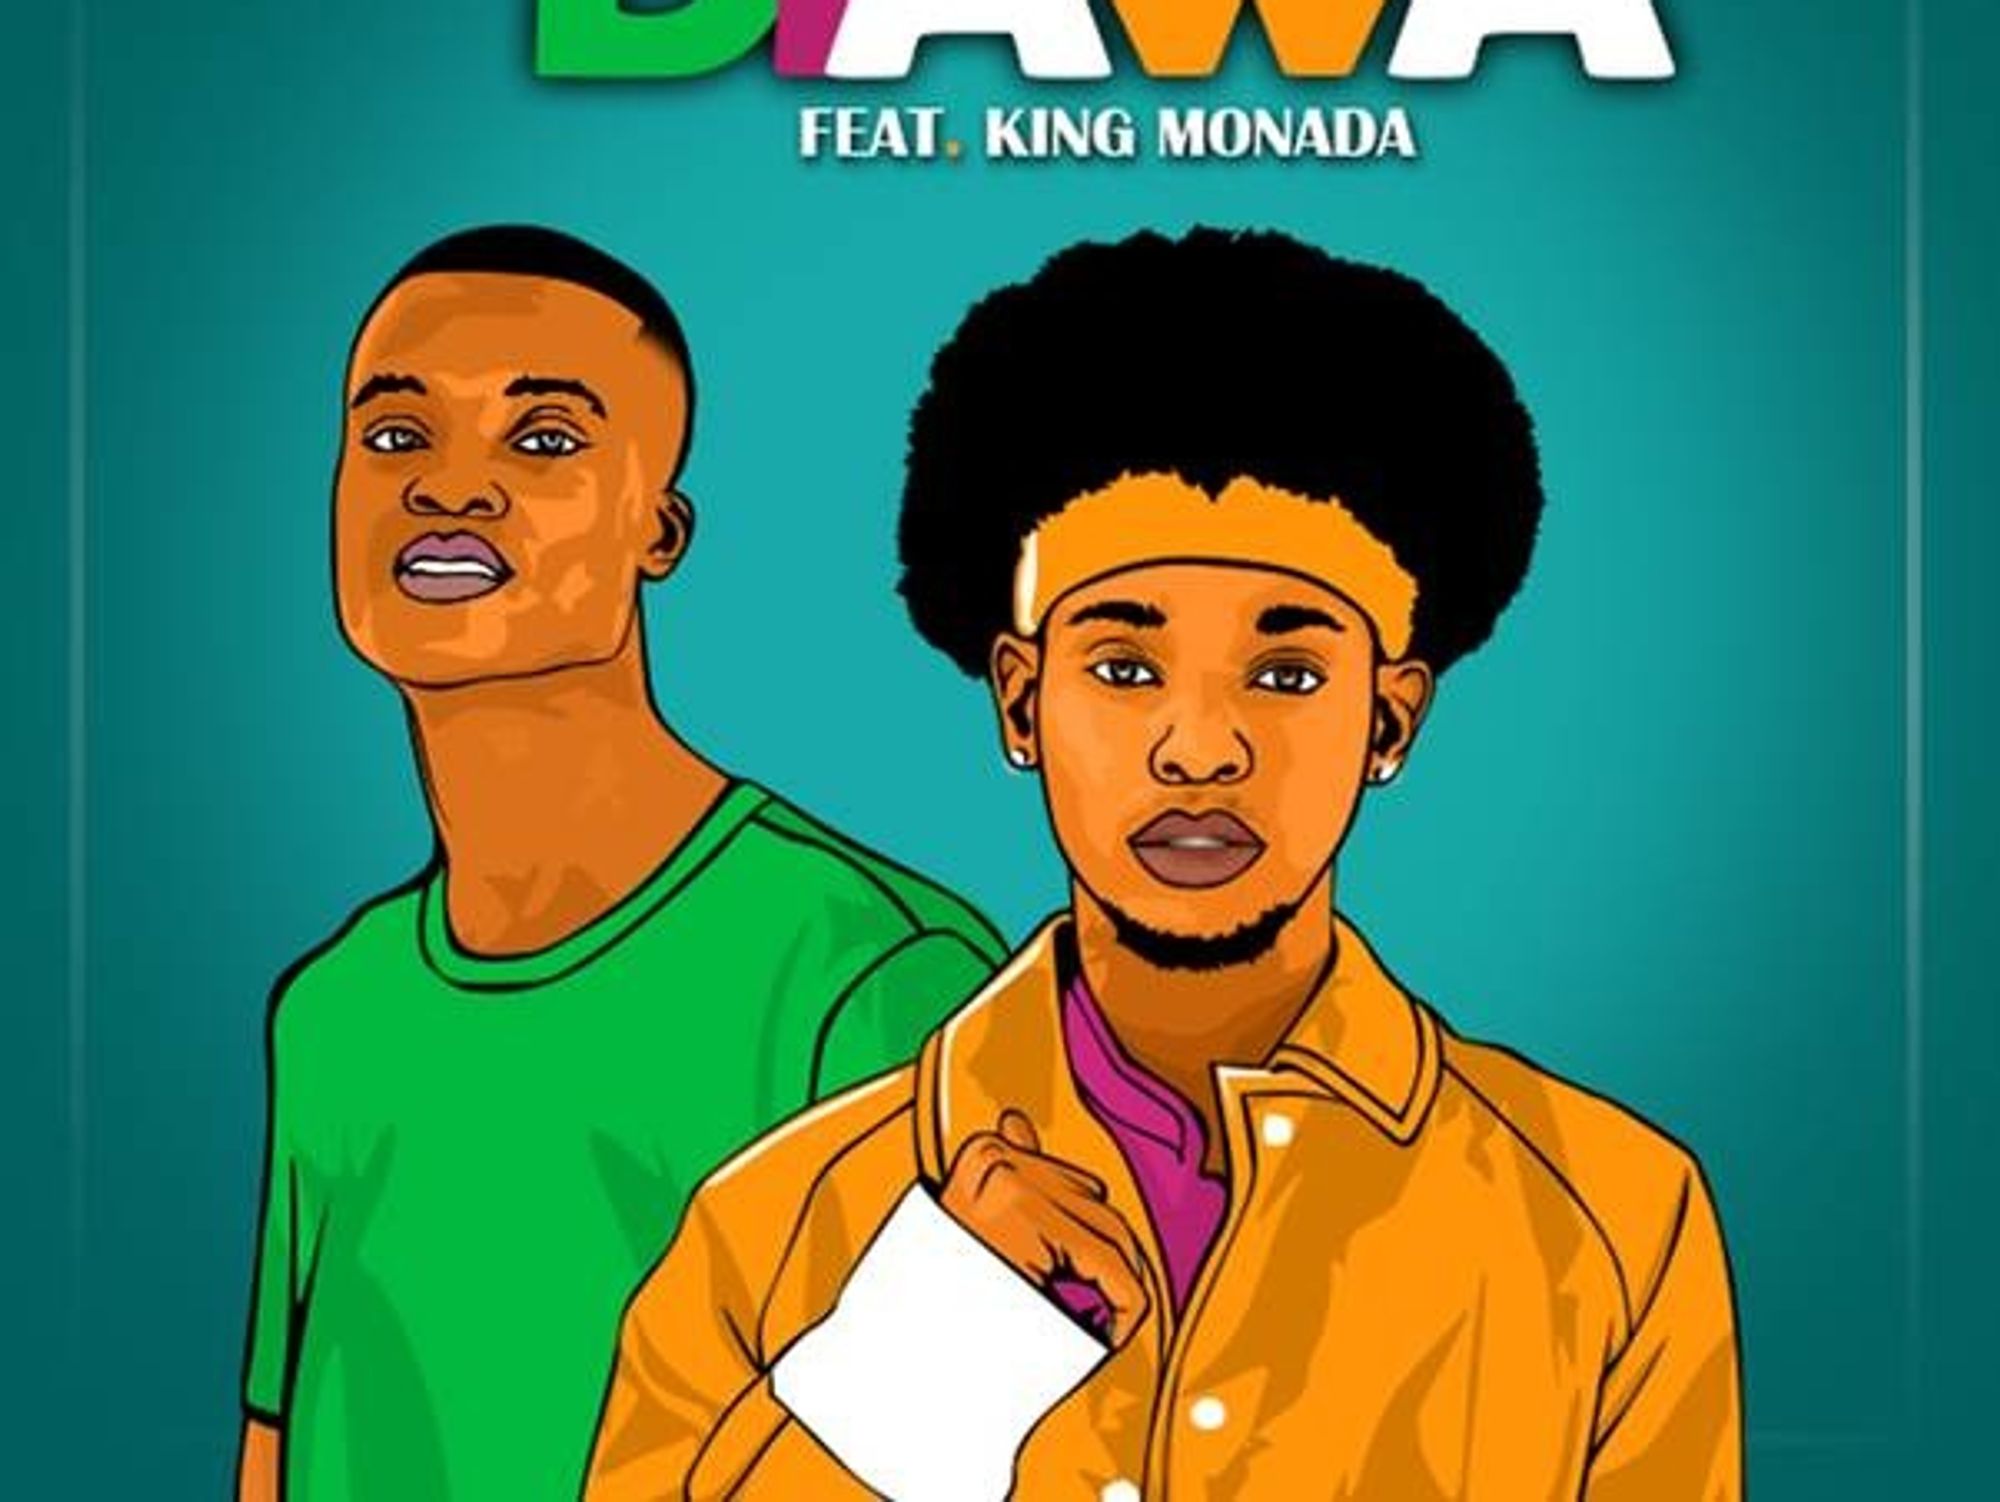 Listen to 'DIAWA' by Benny Afroe Featuring King Monada